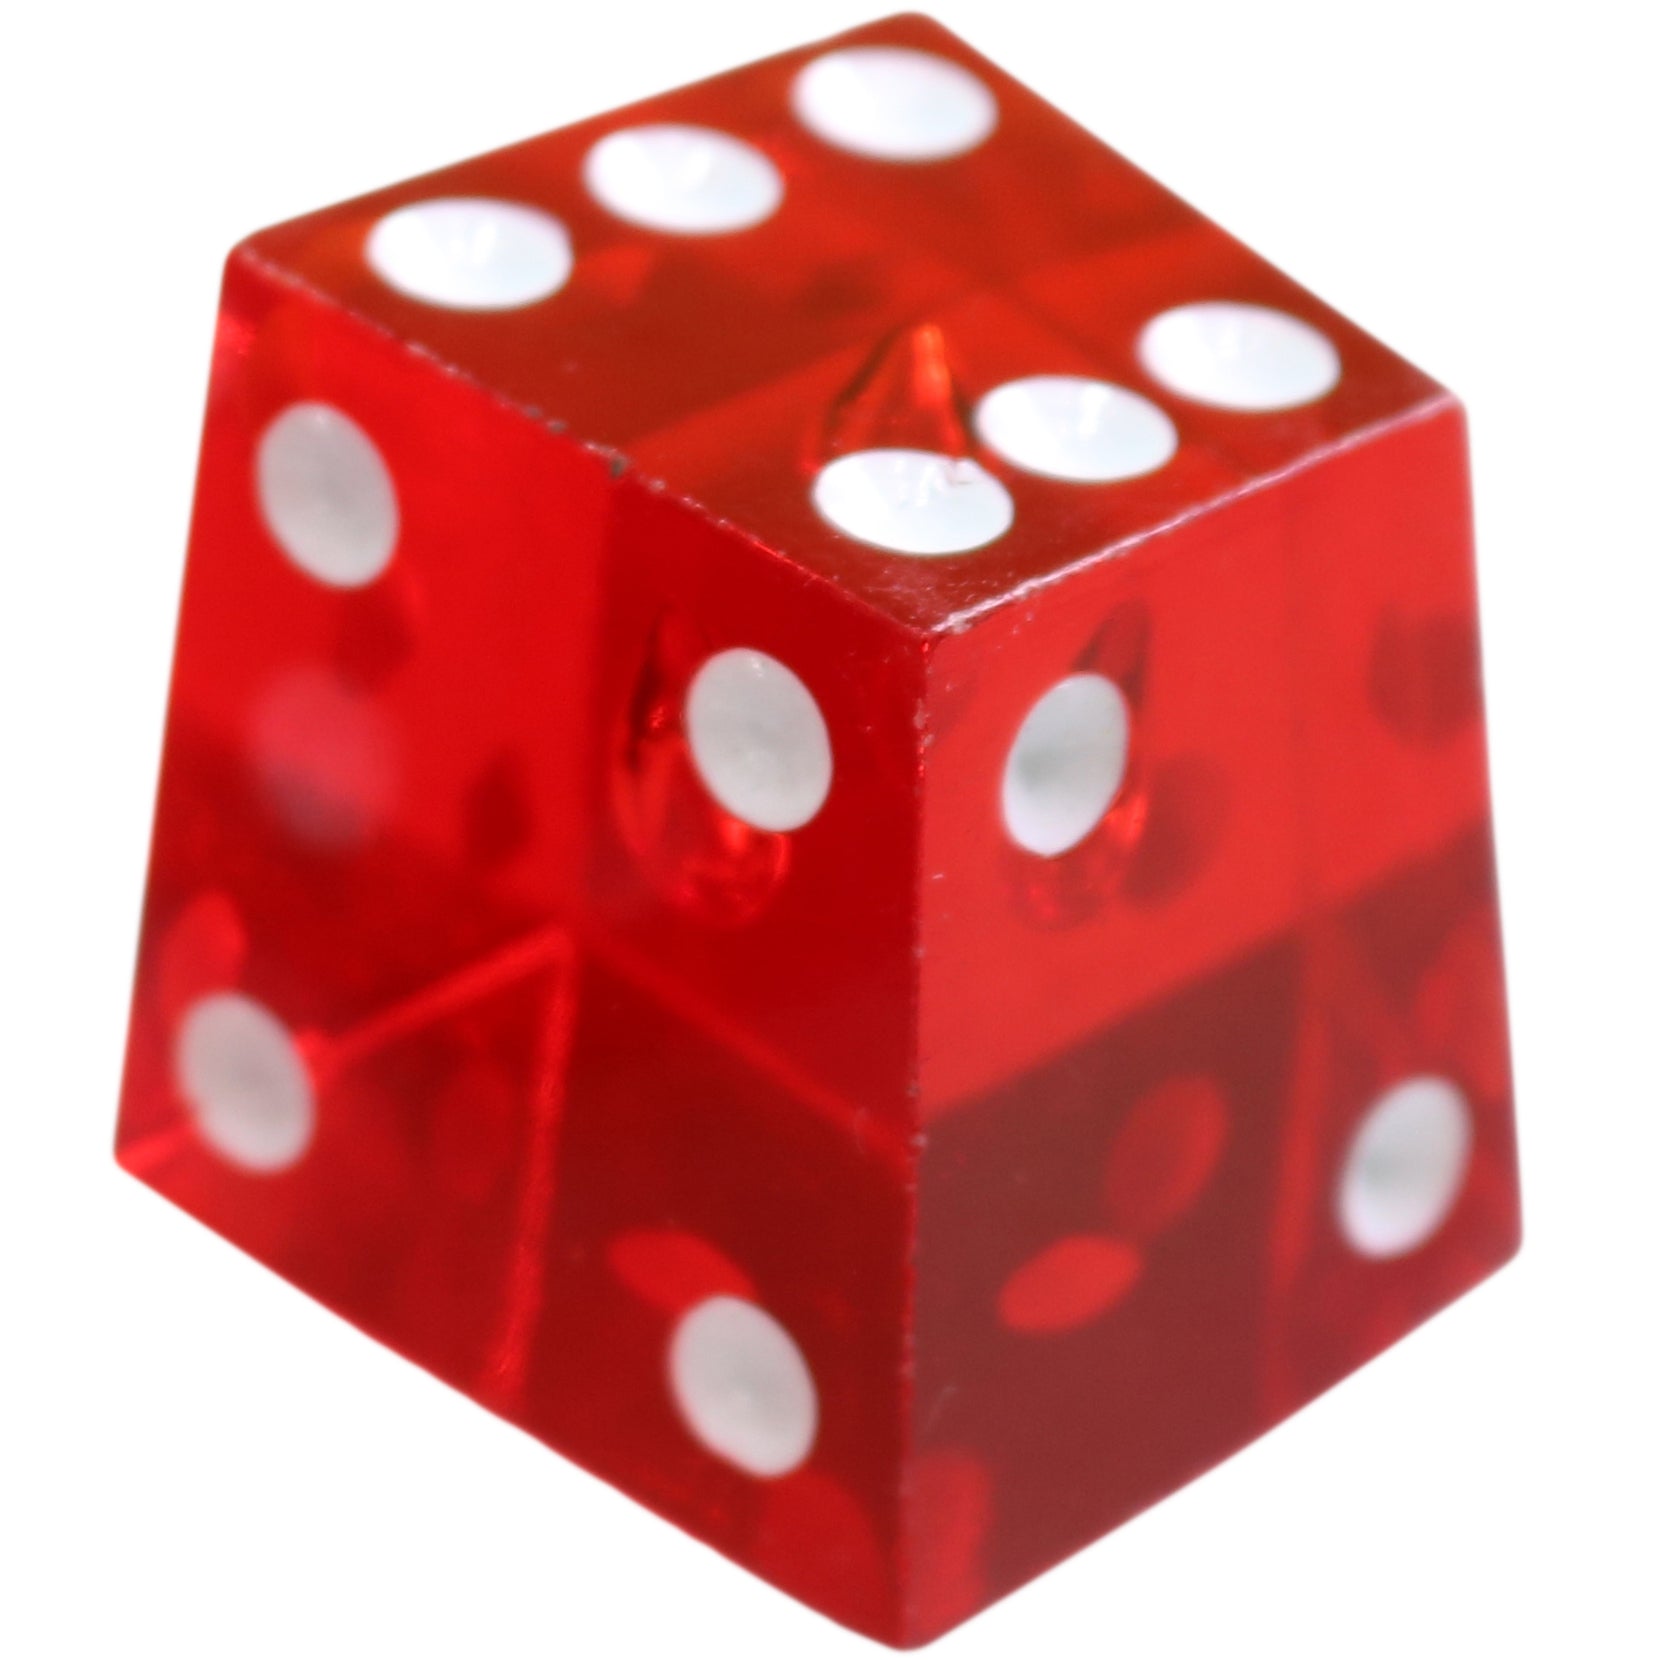 Precision Corner Crooked Translucent Dice - Red With White Dots